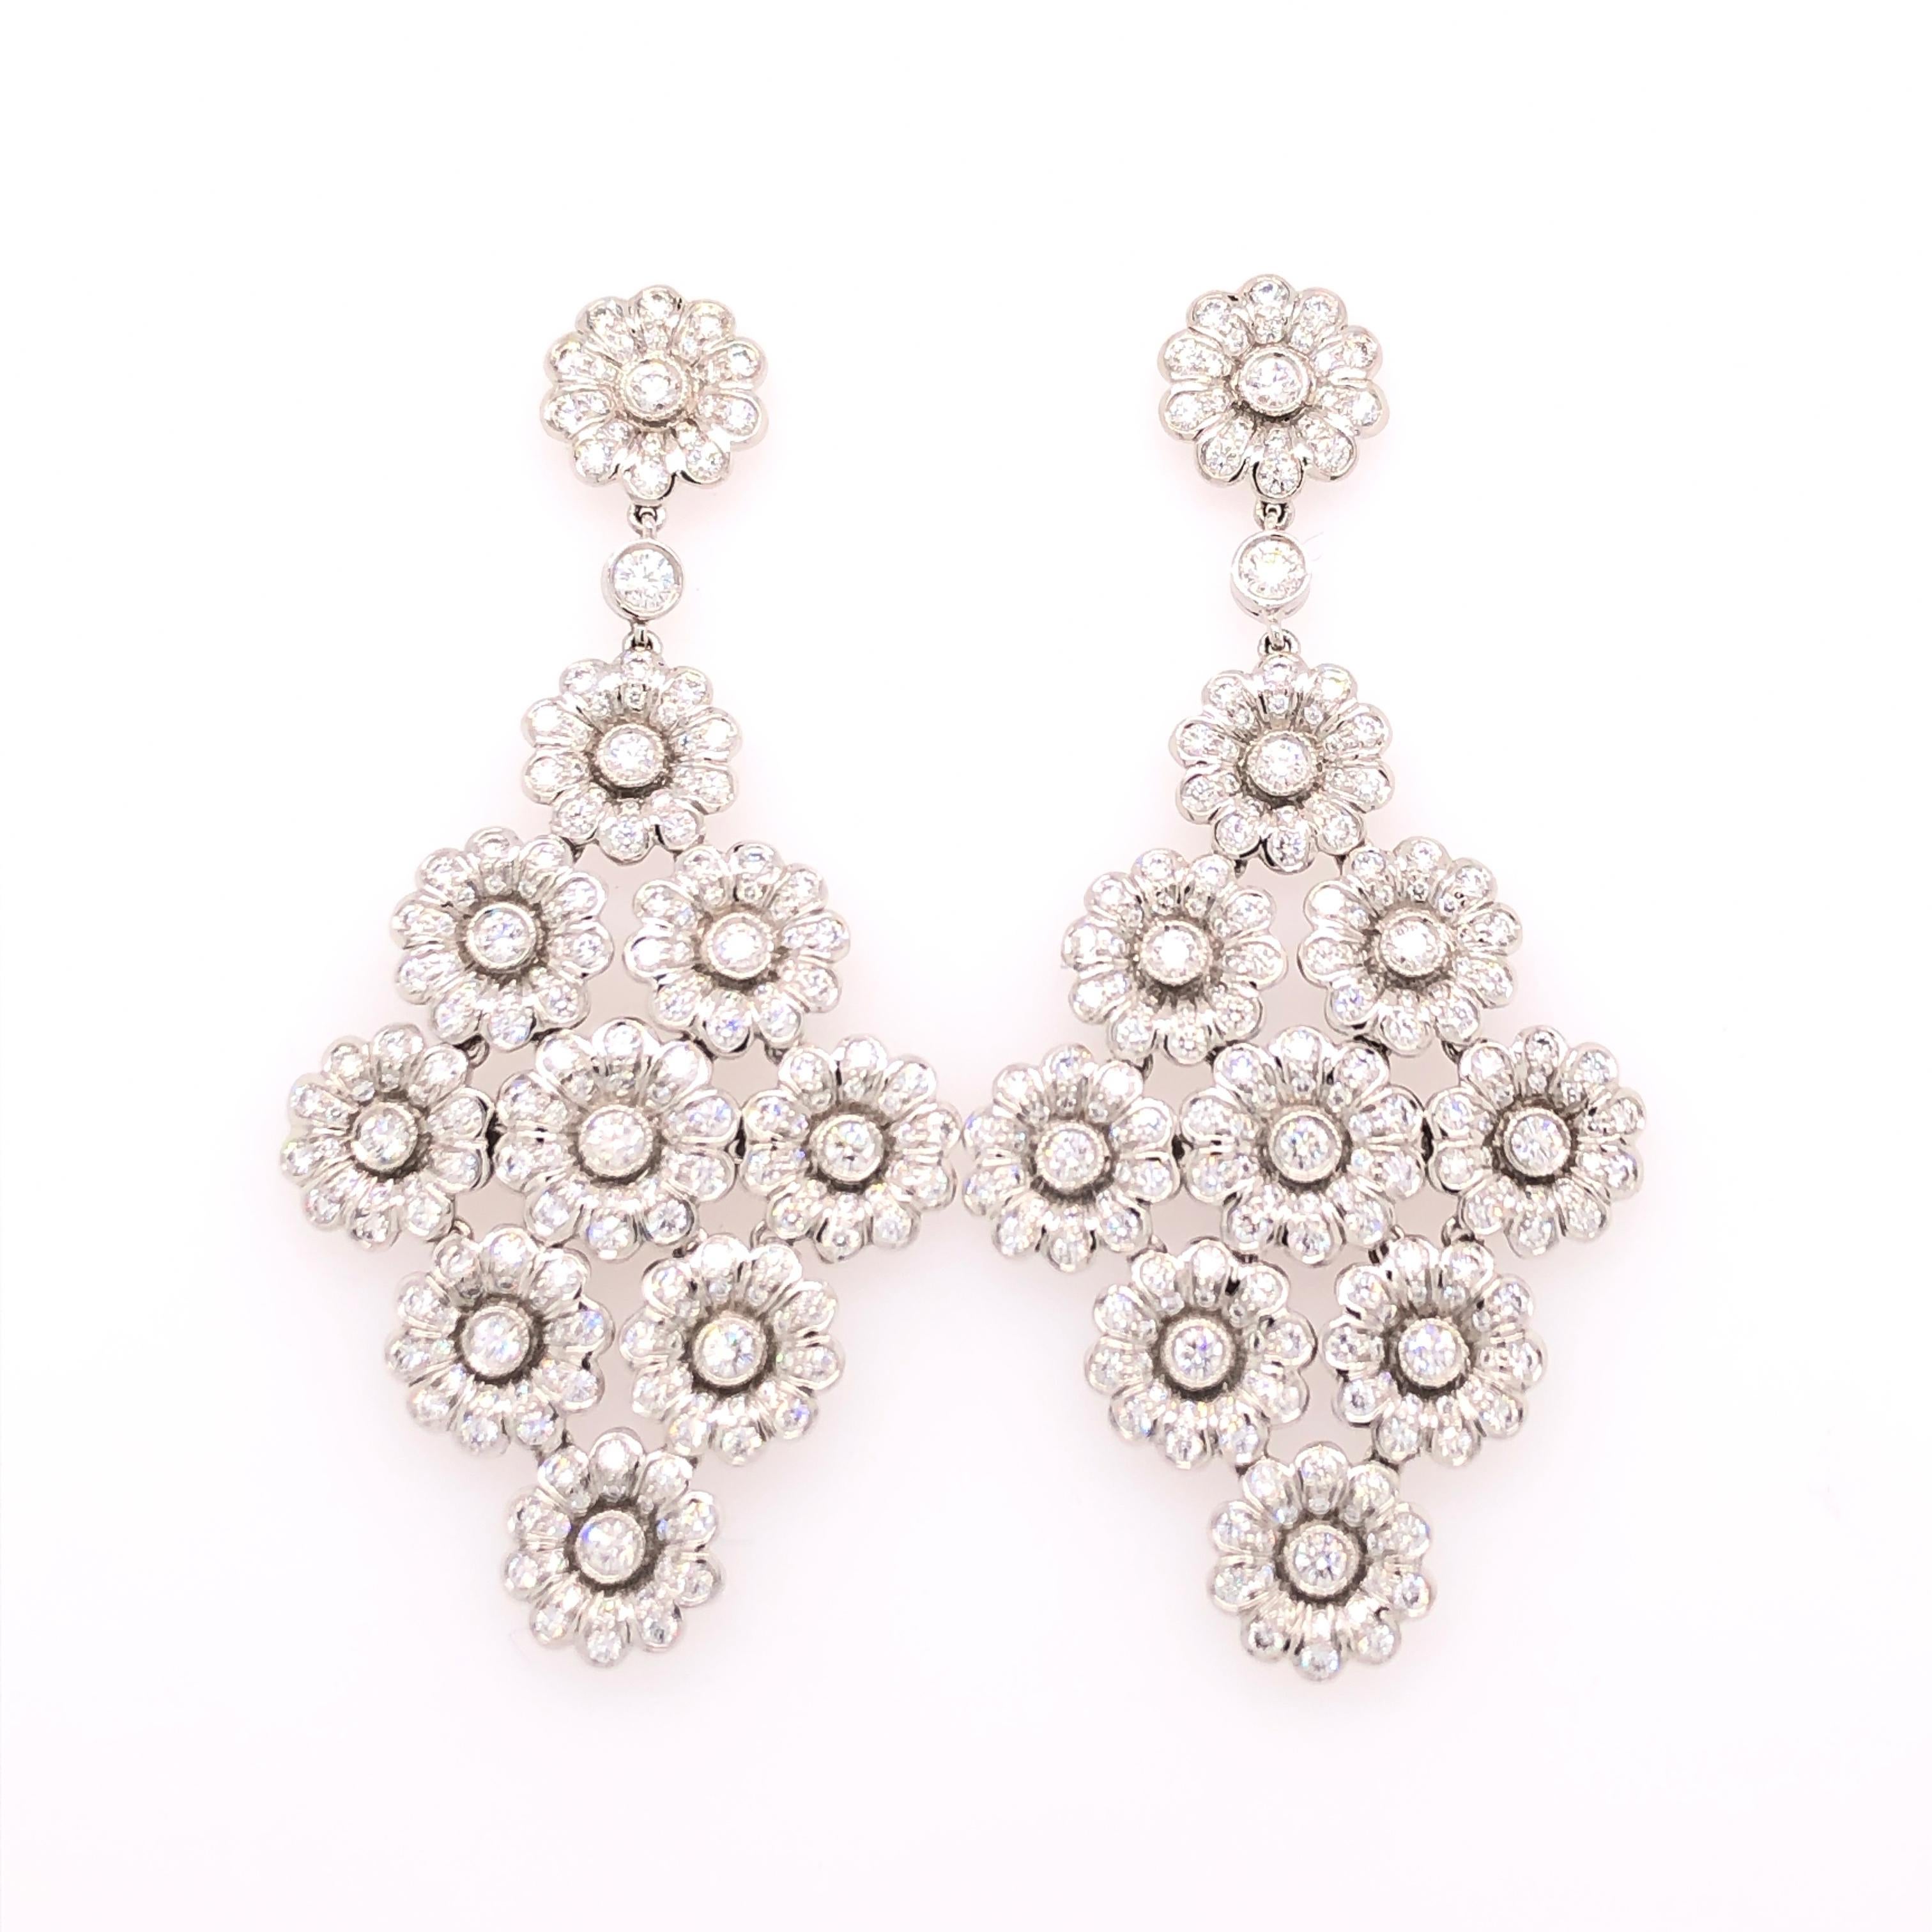 This absolutely stunning pair of Tiffany & Co. floral motif dangle earrings are made from platinum and 4.15 CTW of diamonds. Nine flowers create a diamond shape that dangles from the 10th flower. Post back, these earrings are made for pierced ears.